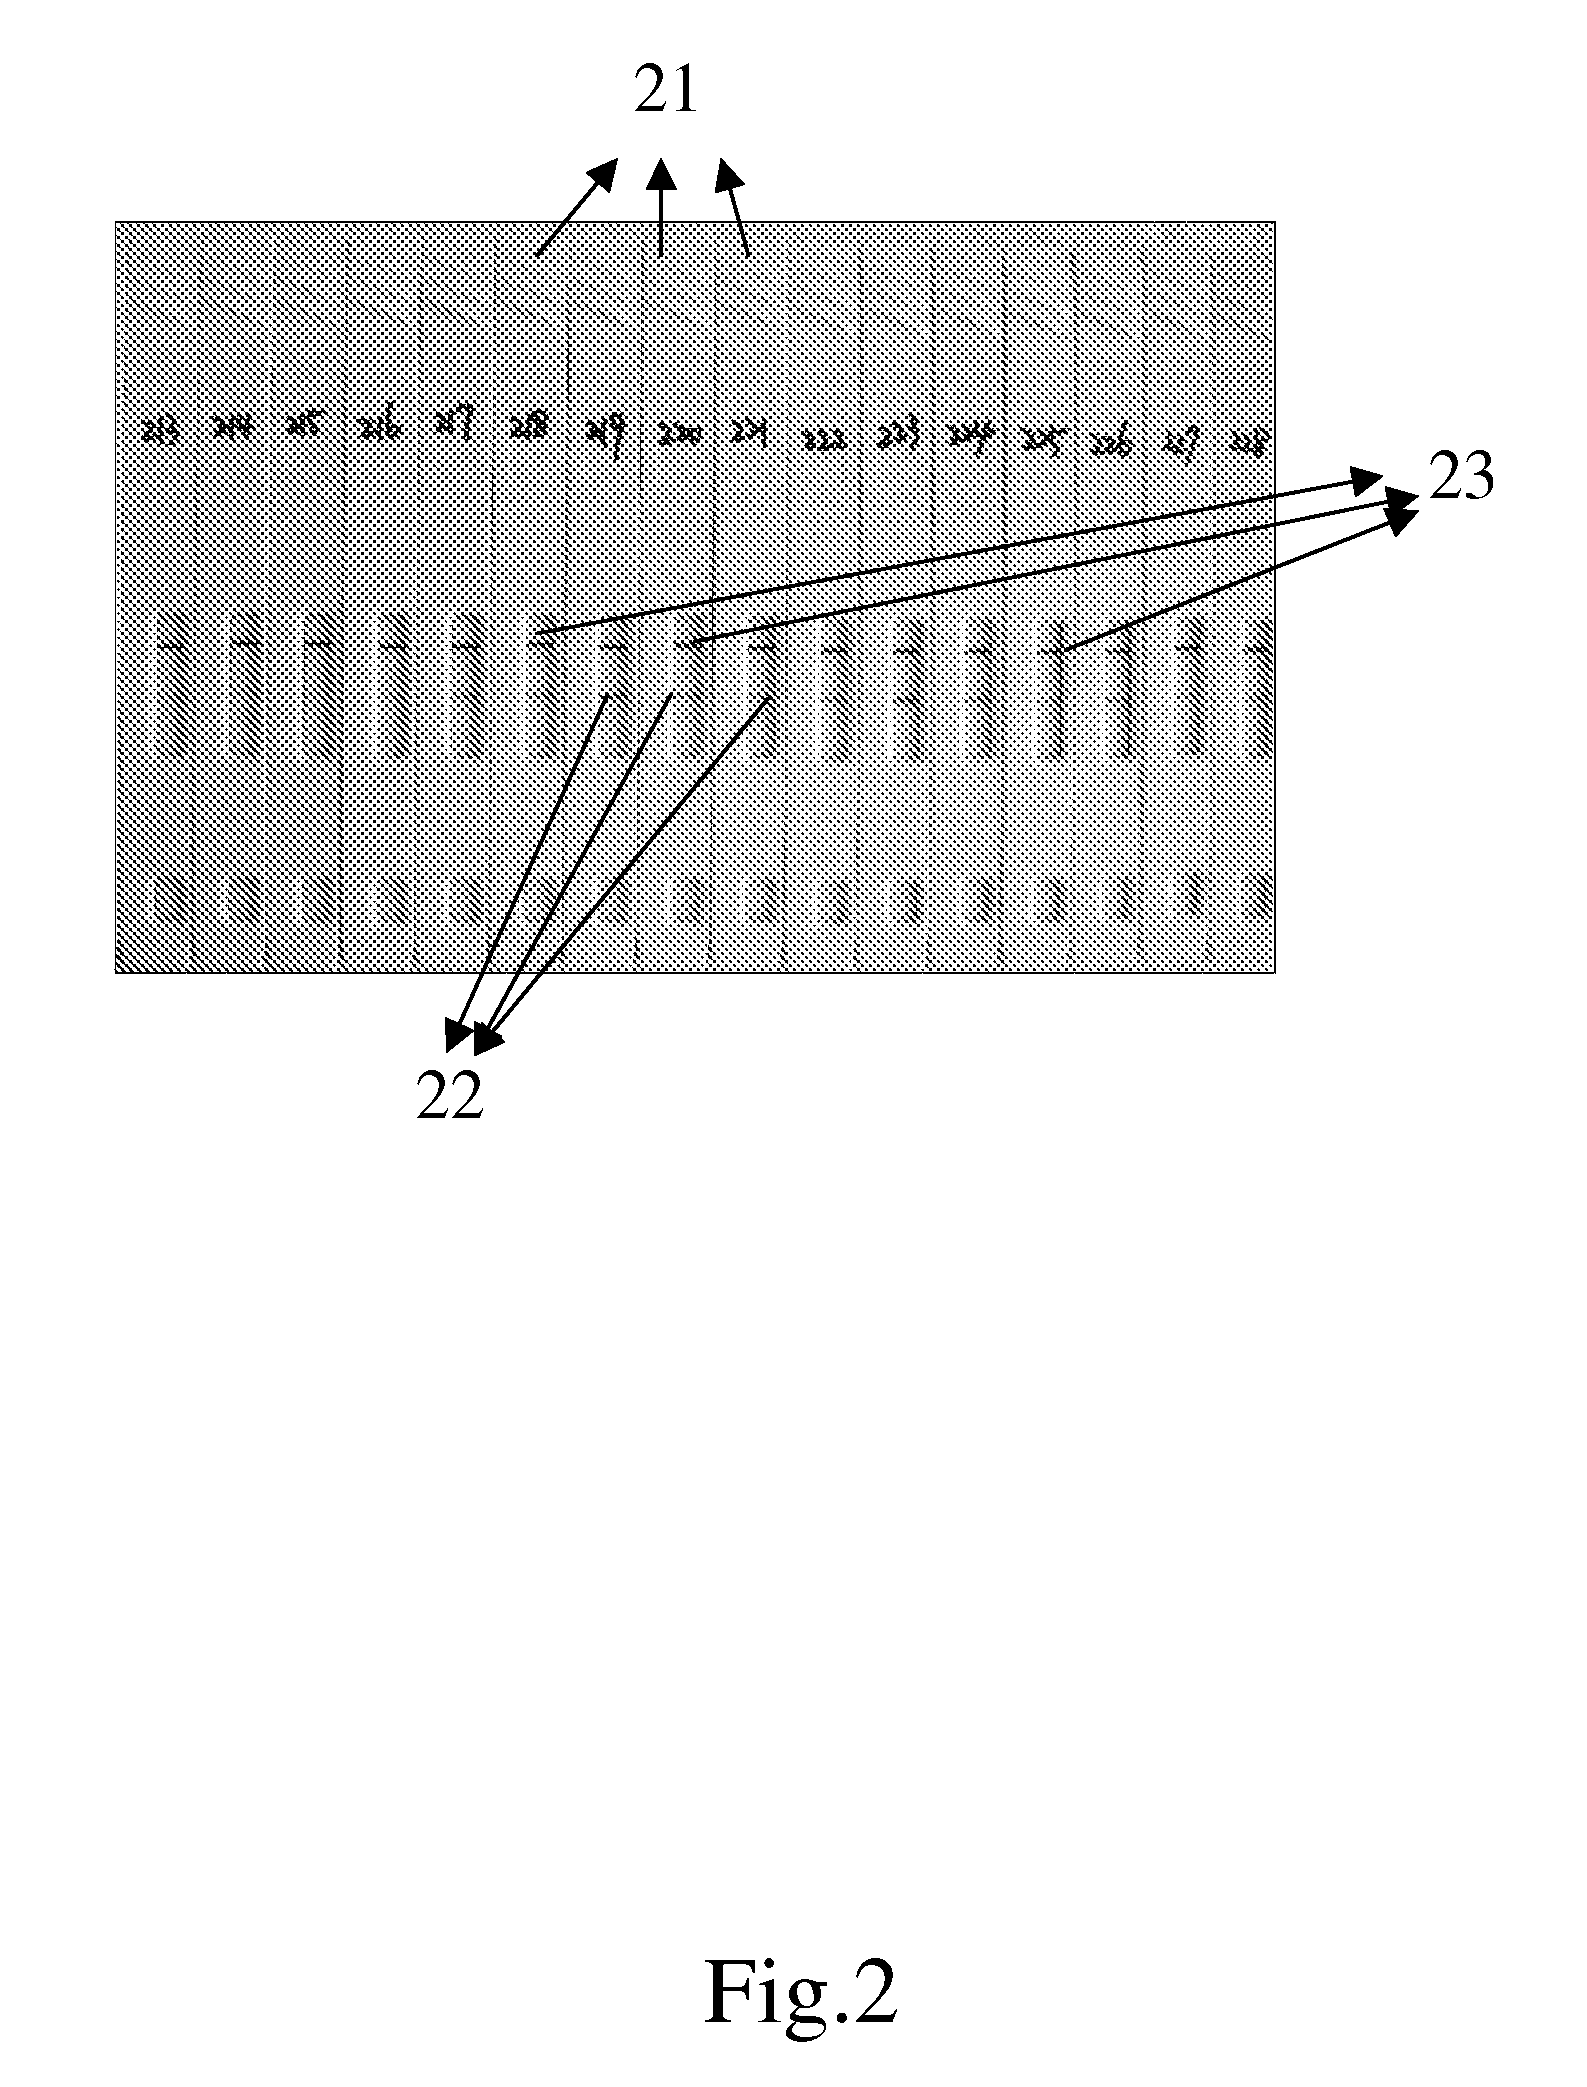 Method for detection of foot-and-mouth disease virus with chromatographic strip test